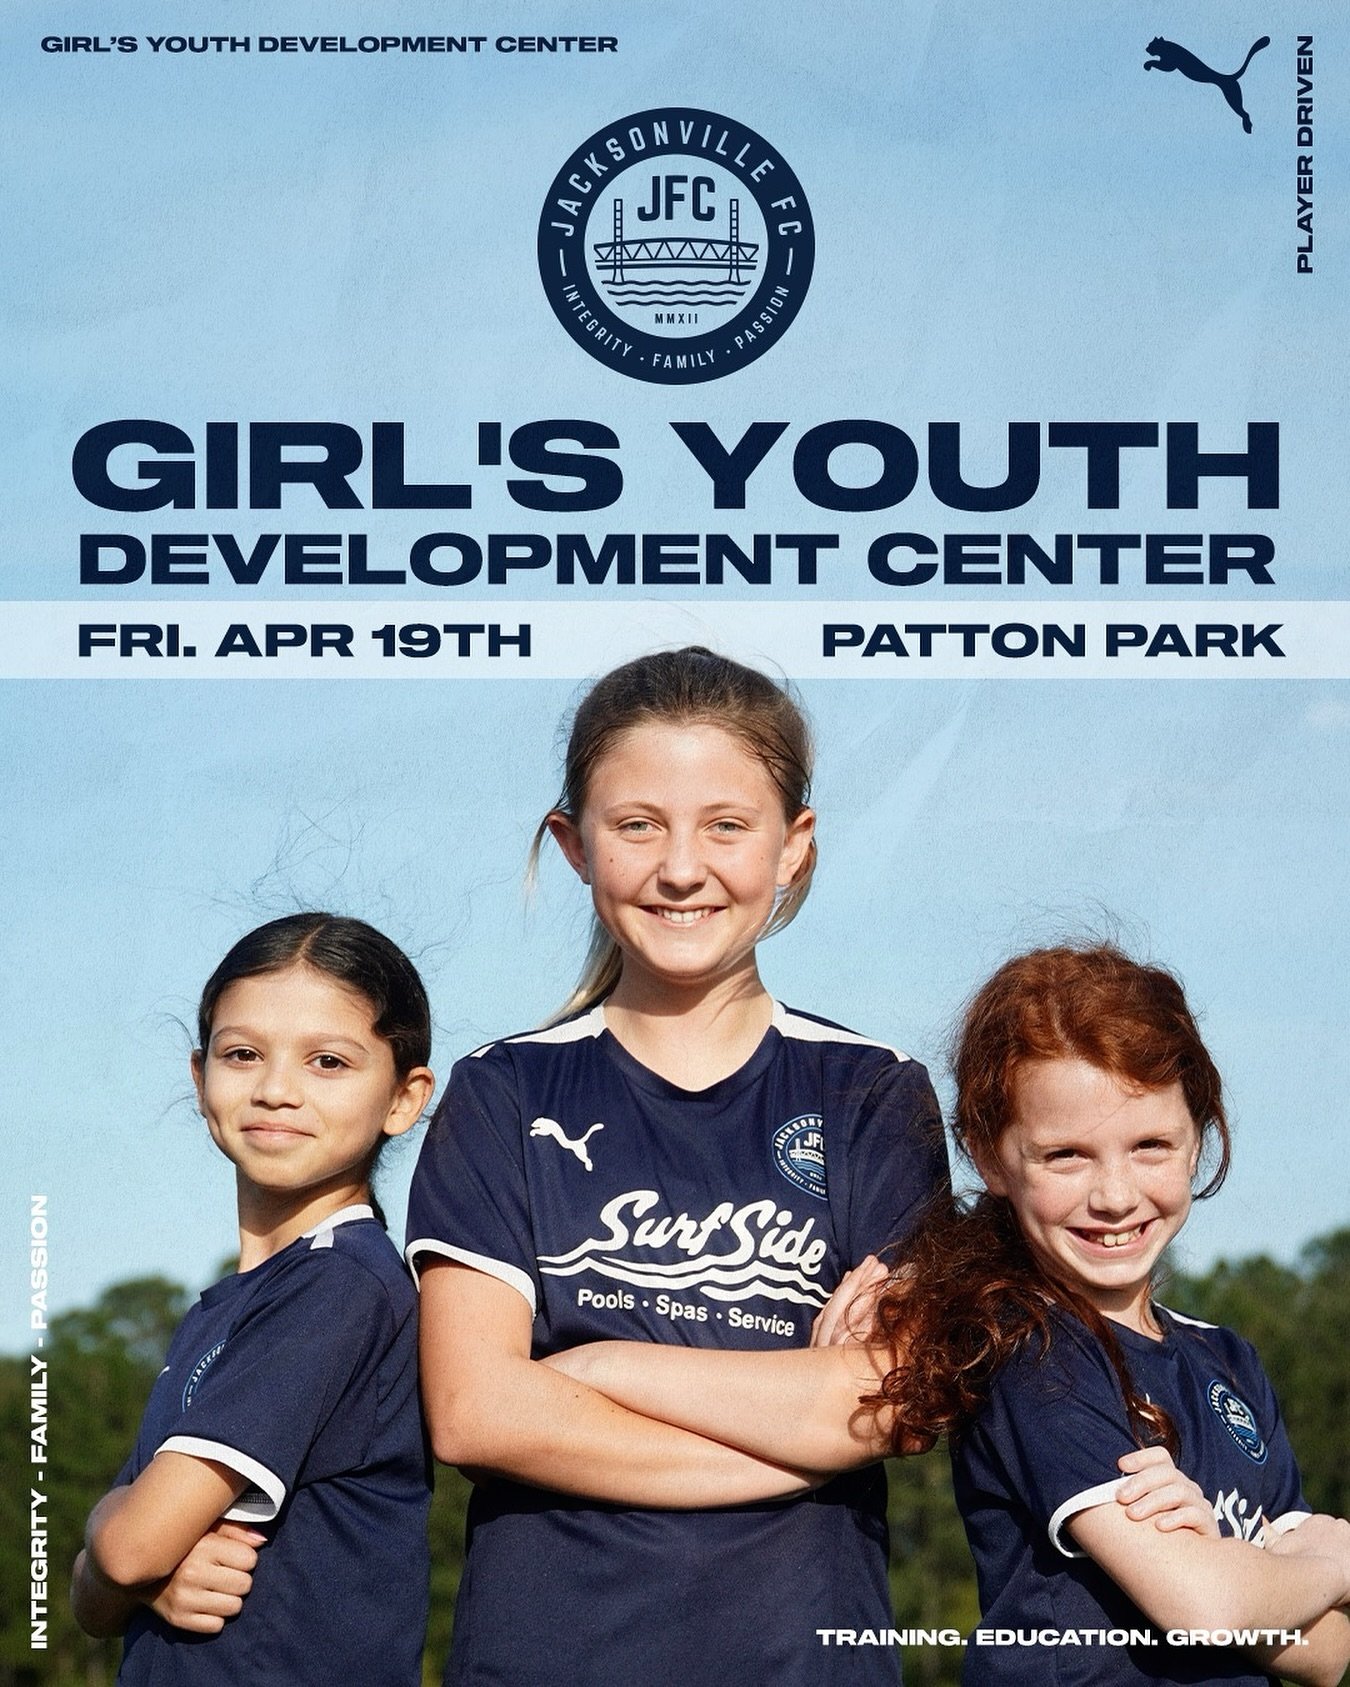 Our second JFC Girls Youth Development Center Clinic will be held on Friday, April 19th at Patton Park on Field 6 from 6:30pm to 7:45pm. 

This free girls clinic is being offered to players with 2018, 2017 and 2016 birth years.&nbsp;

Even if your da